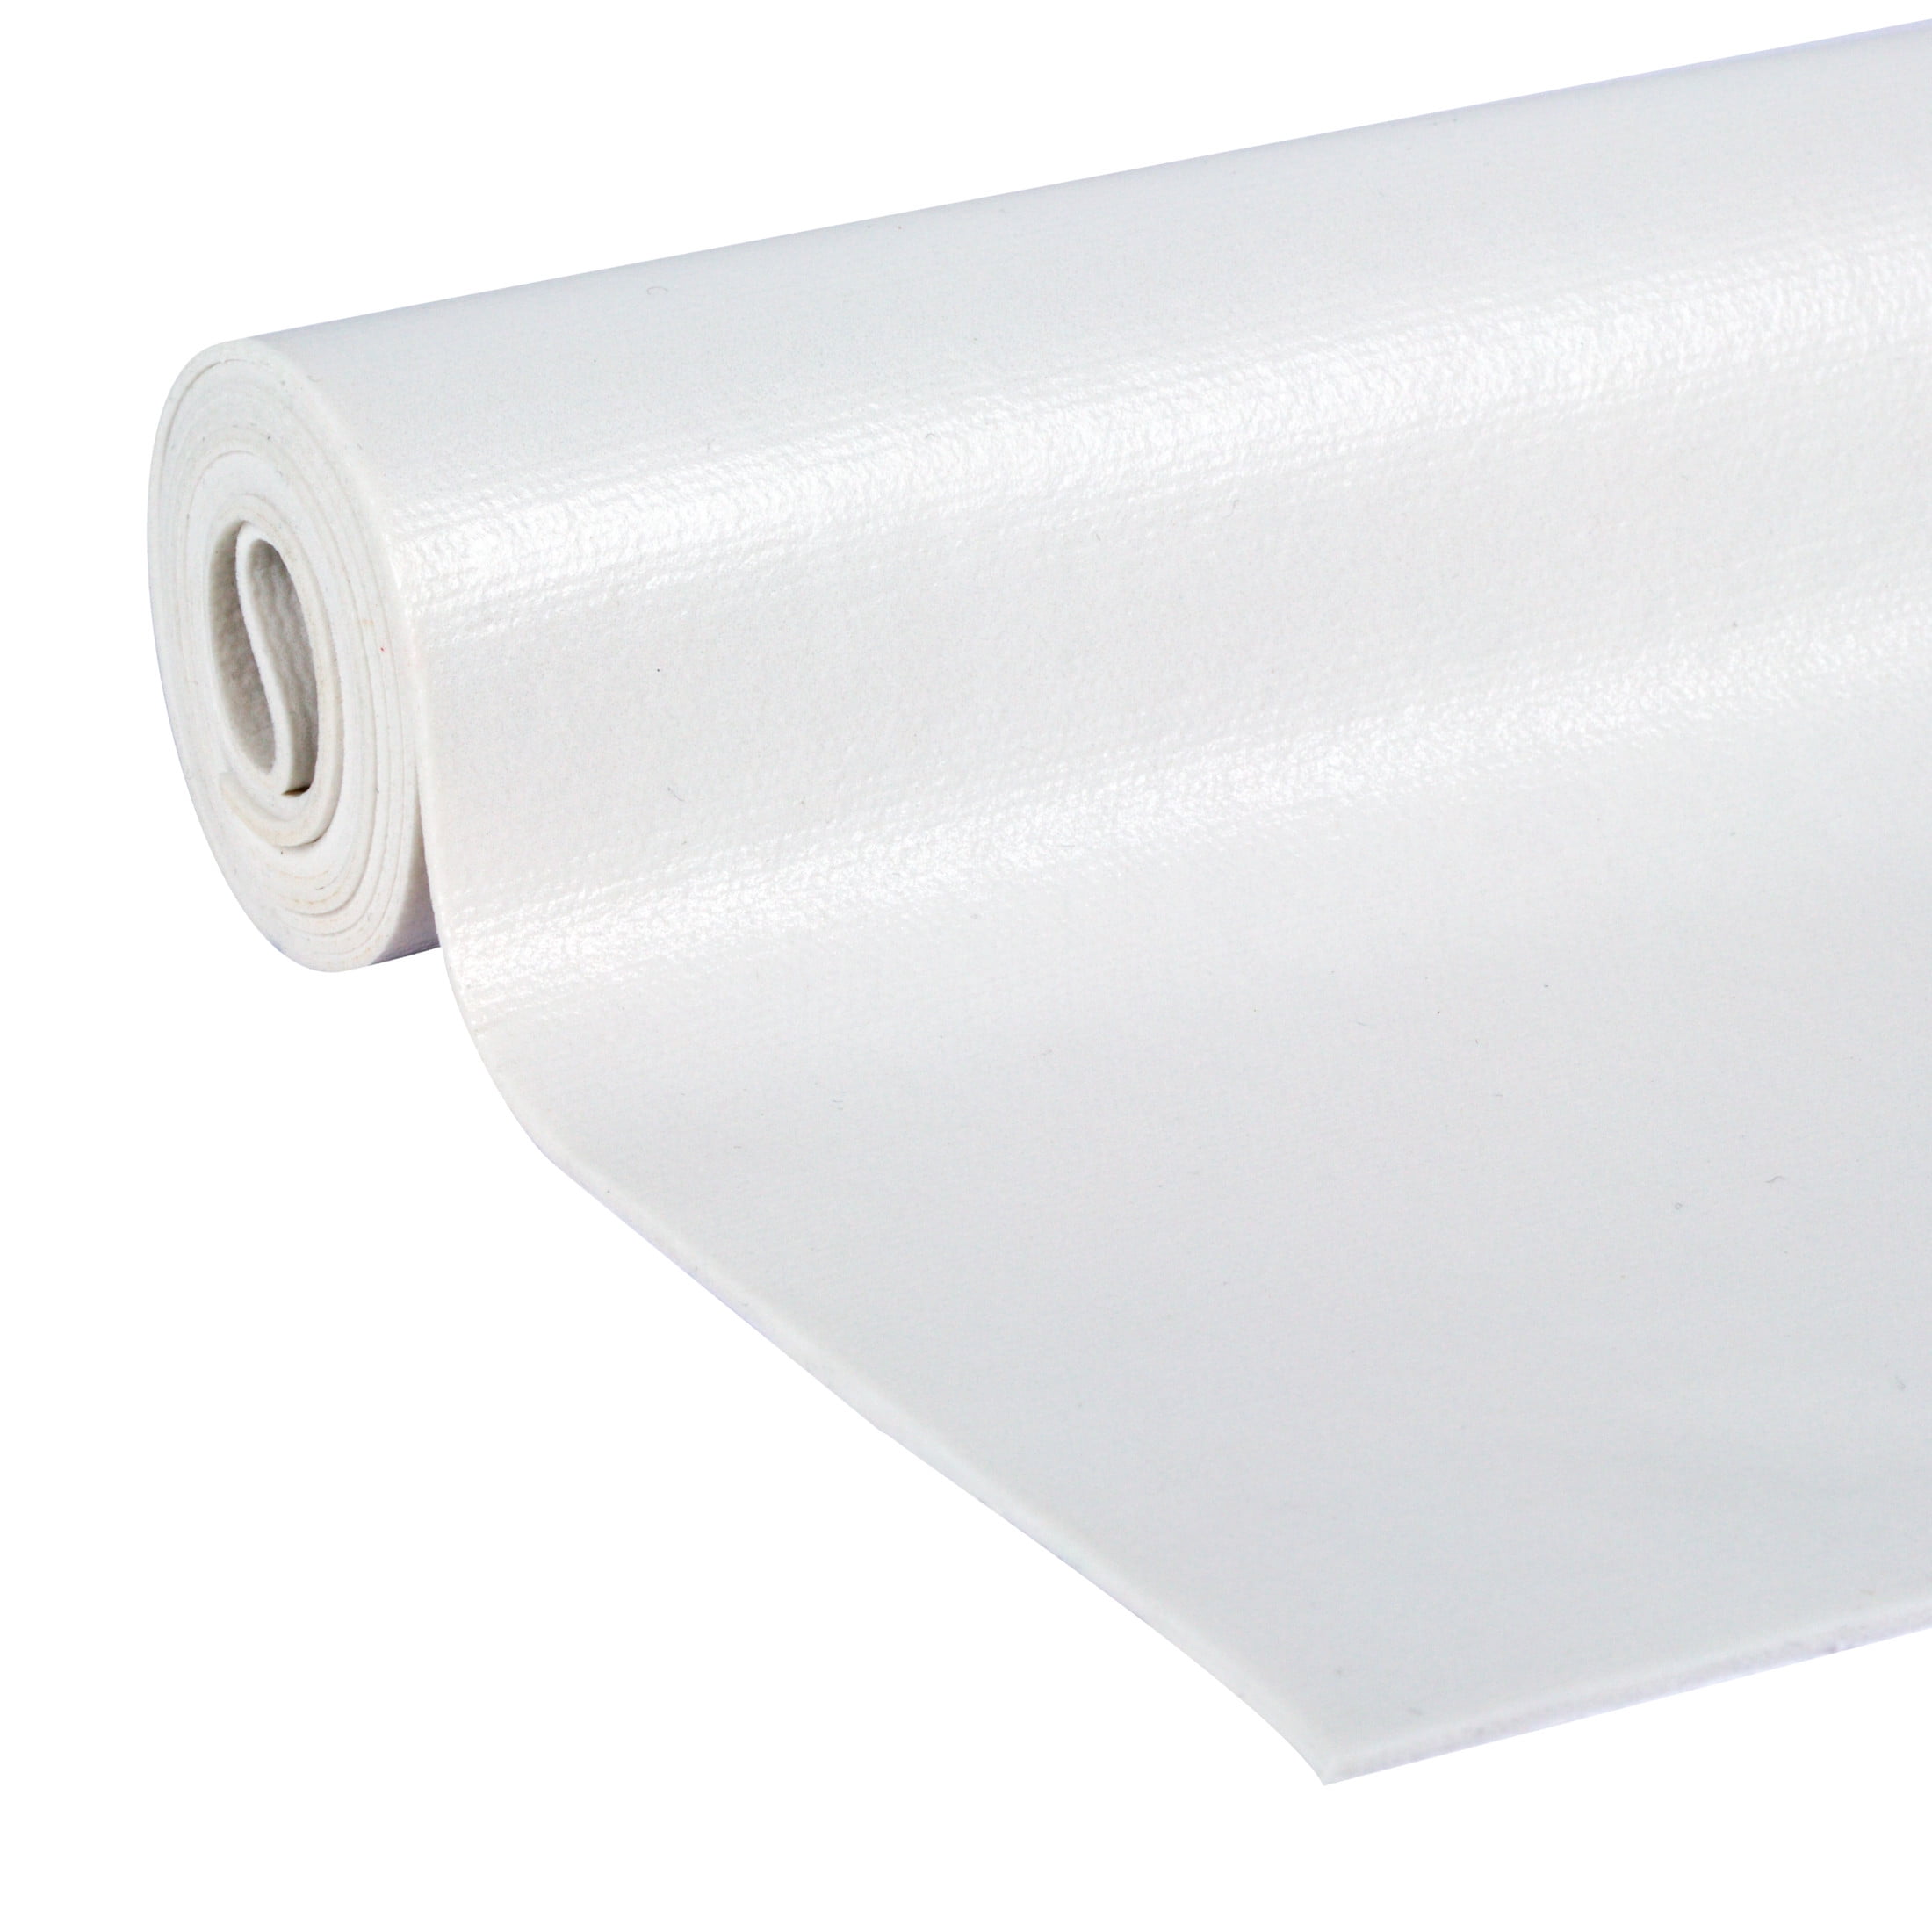 Grip-N-Stick Self-Adhesive Shelf Liner - White, 18 in x 4 ft